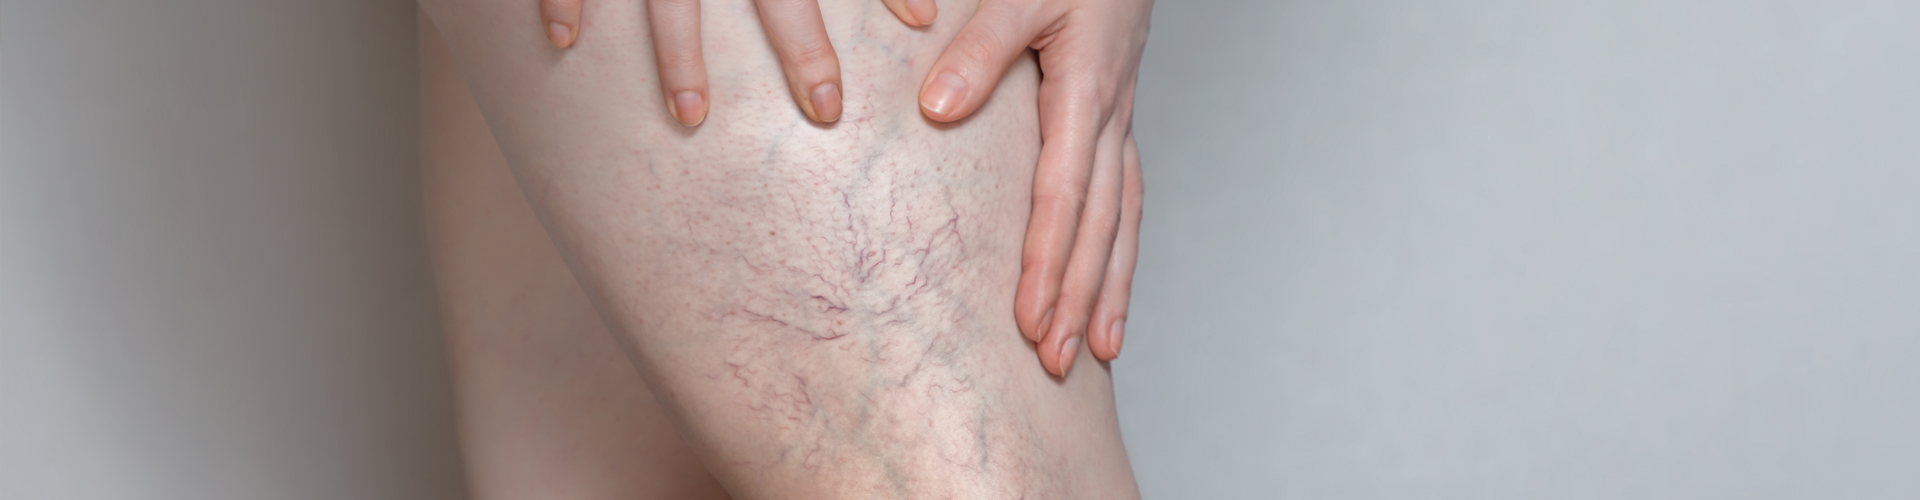 What happens if Varicose Veins go untreated?